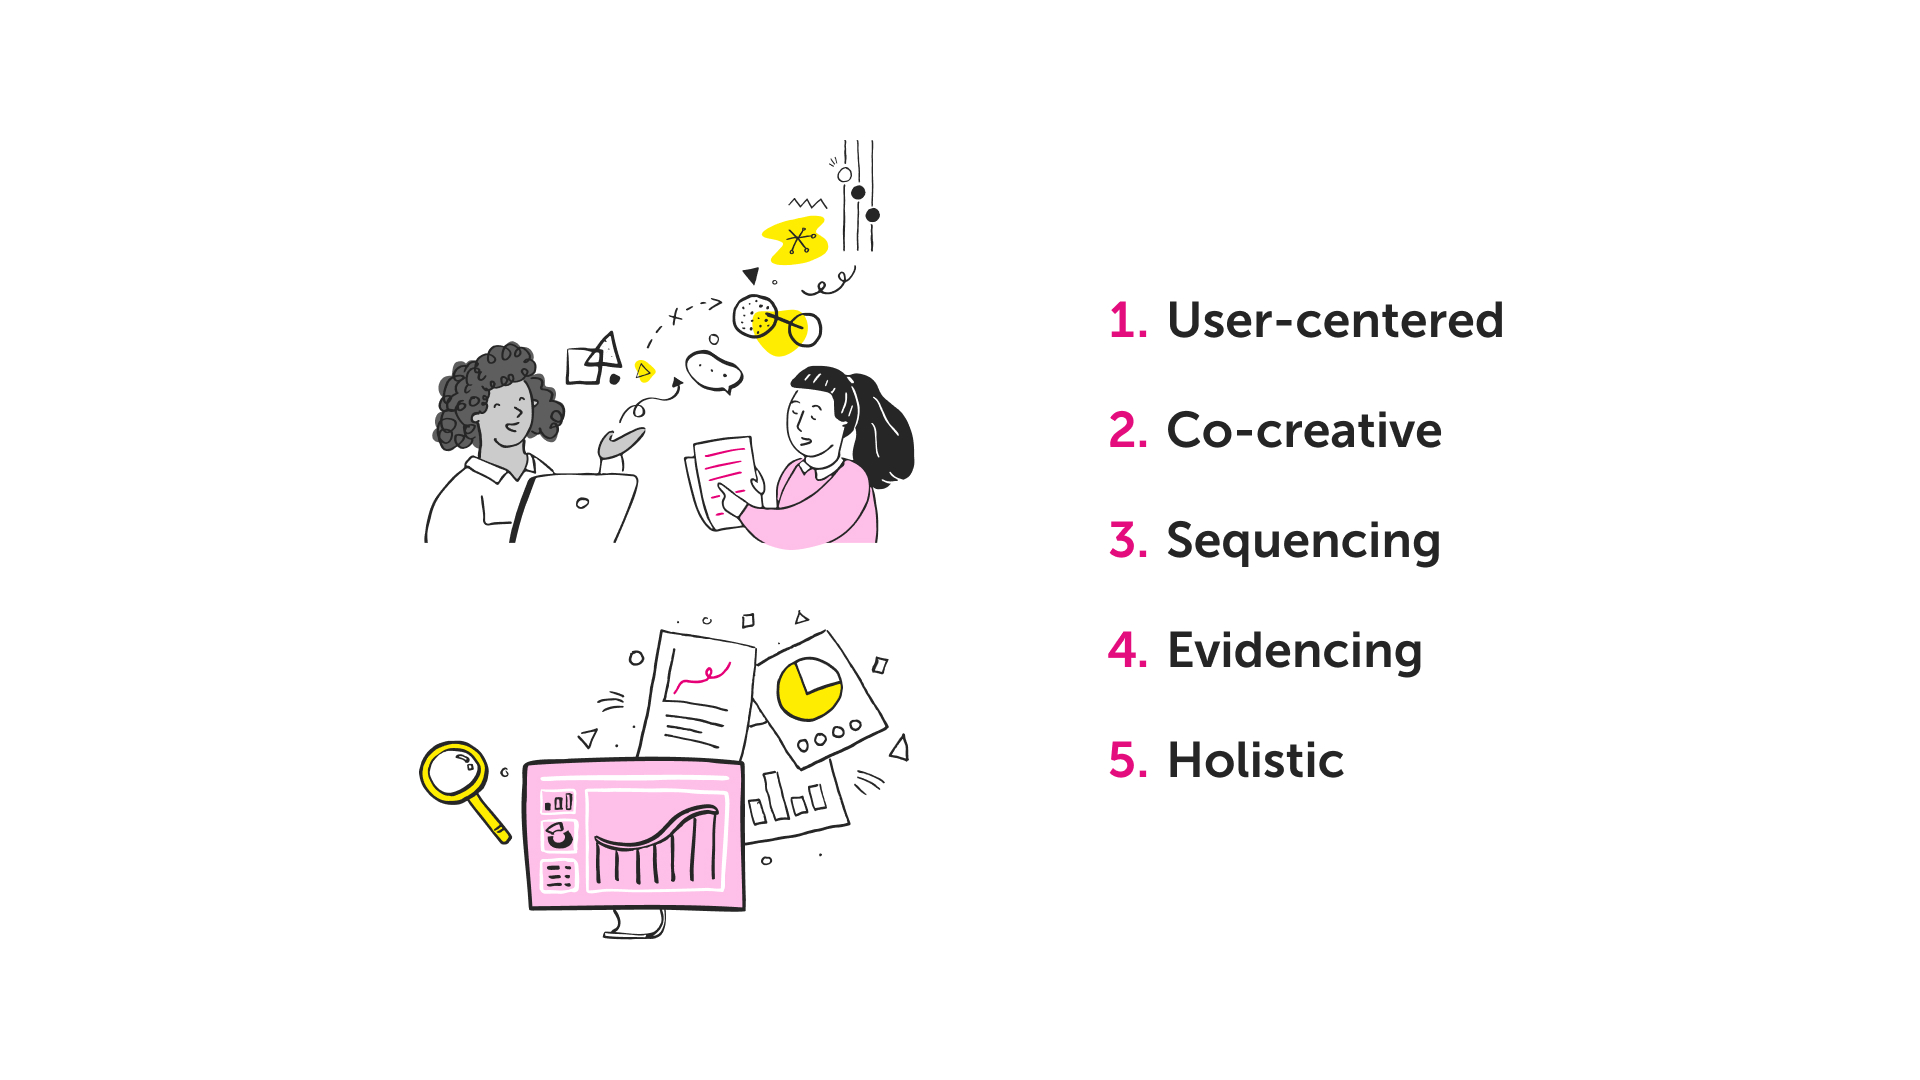 Sketch outlining the key principles of service design - explained within text